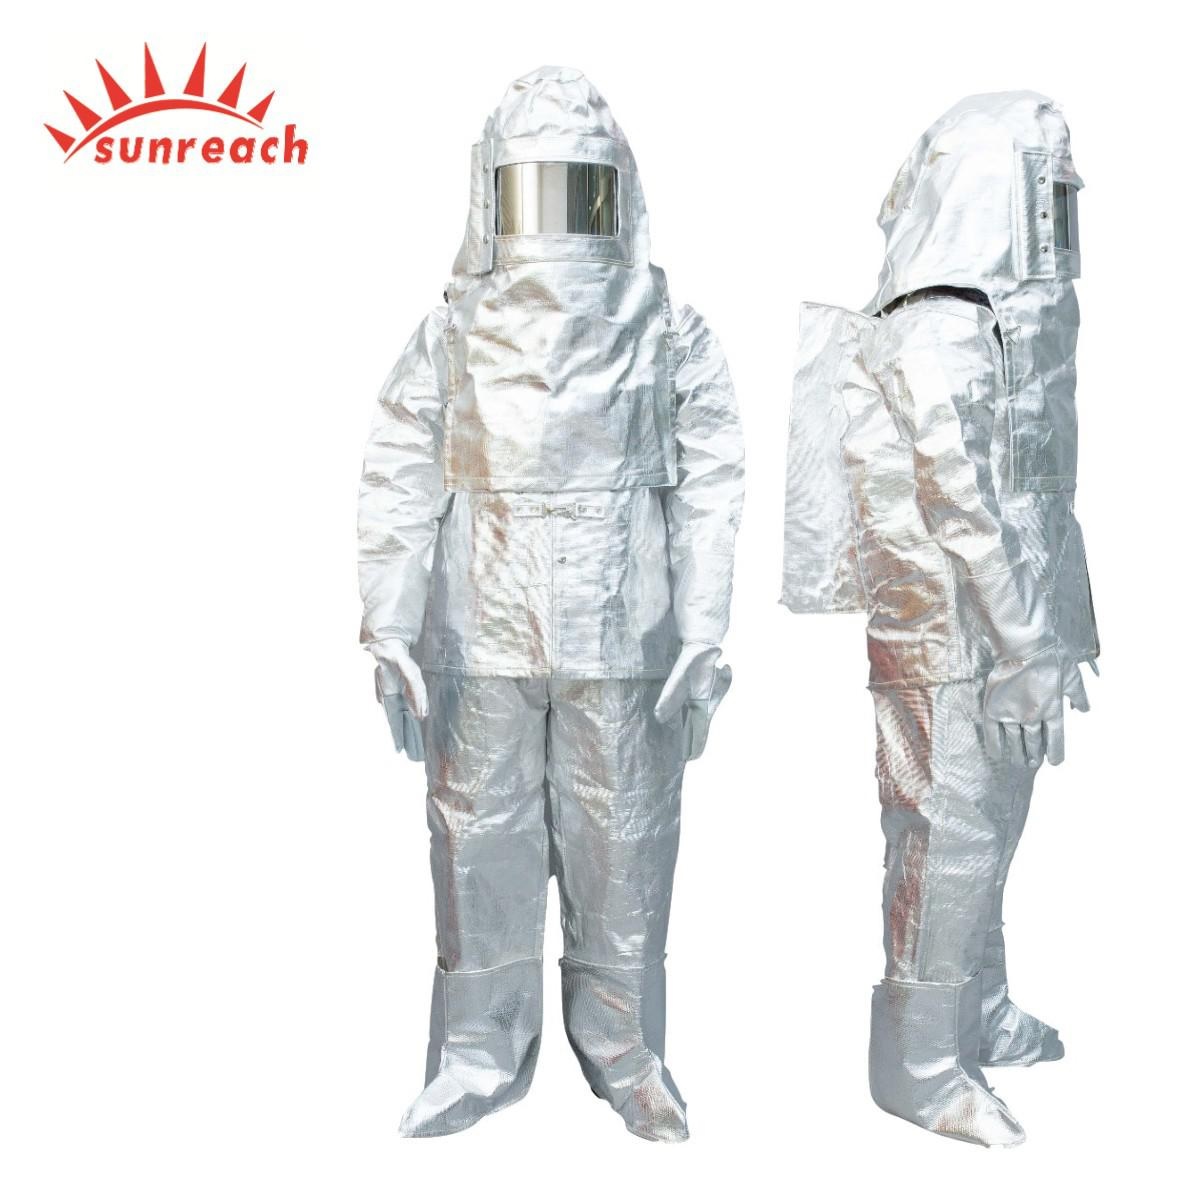 FIREMAN ALUMINIZED FIREPROOF AND HEAT RESISTANT SUIT SR-F1071 SILVER